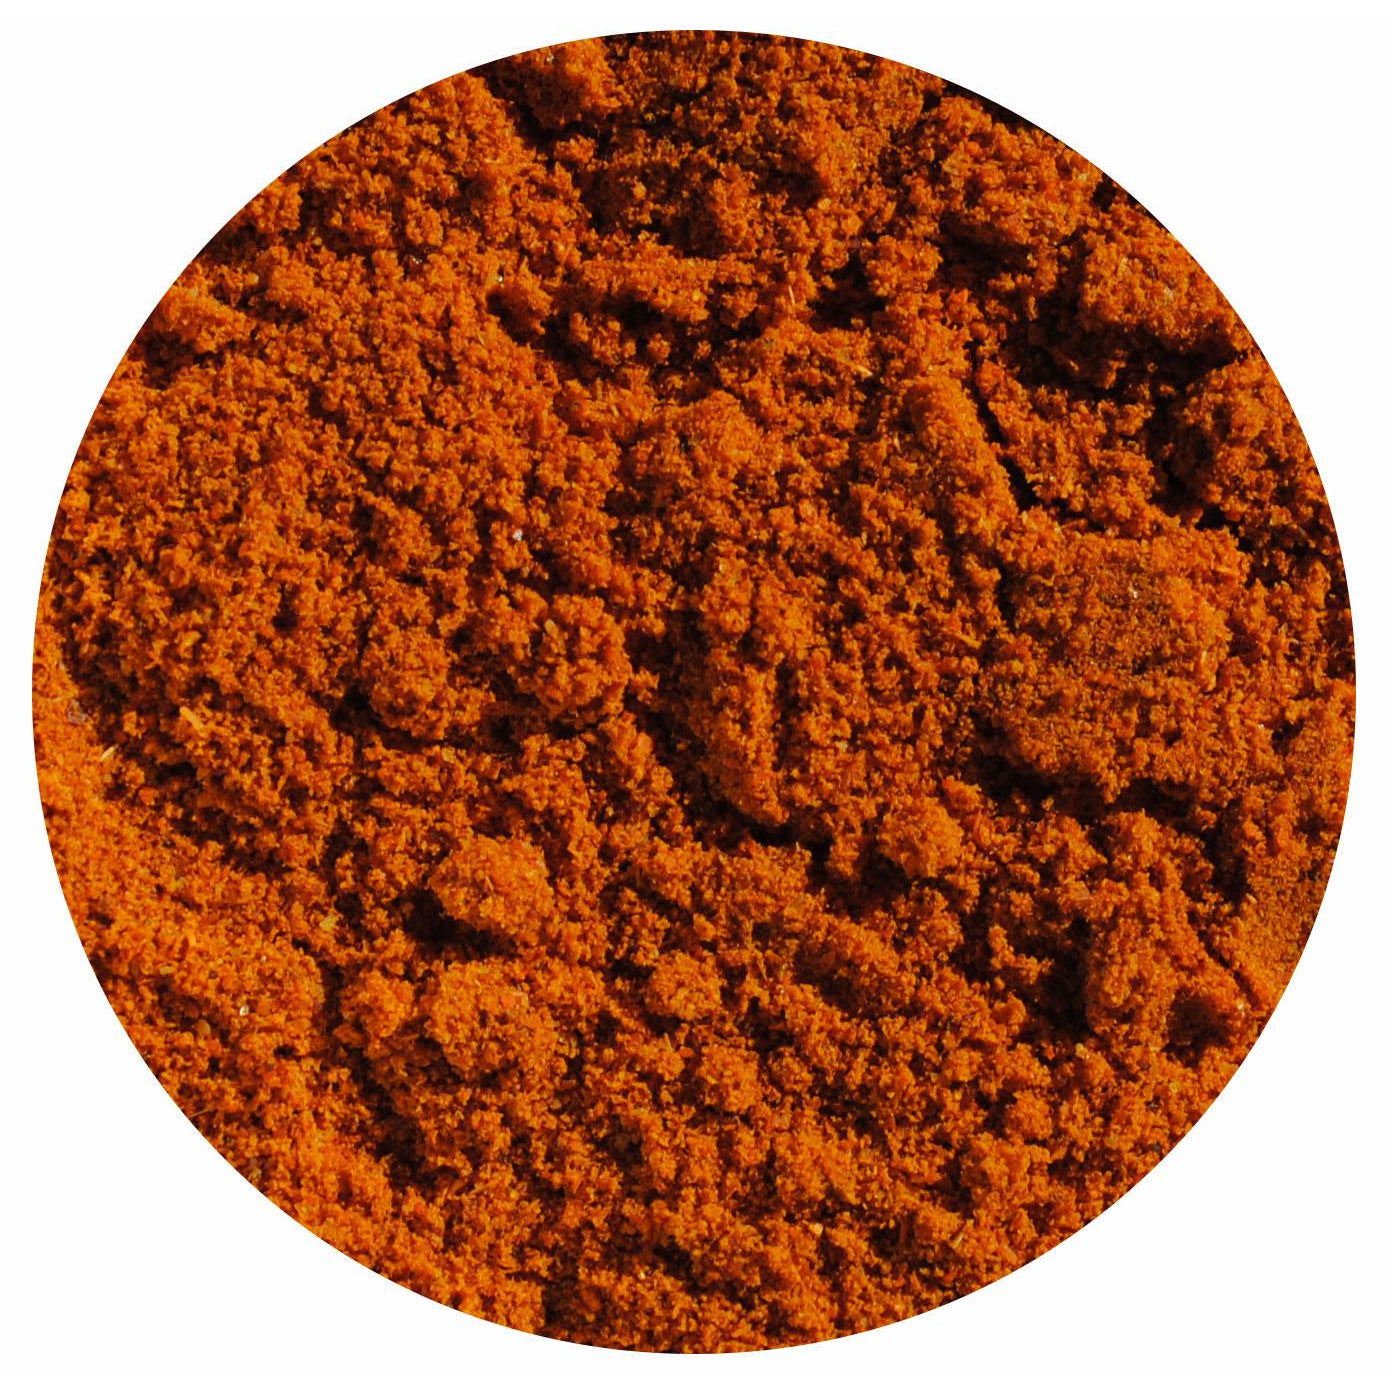 Red Hot Curry Seasoning FireEater 1.8oz - Unique Flavors Herbs & Spices Unique Flavors LLC 